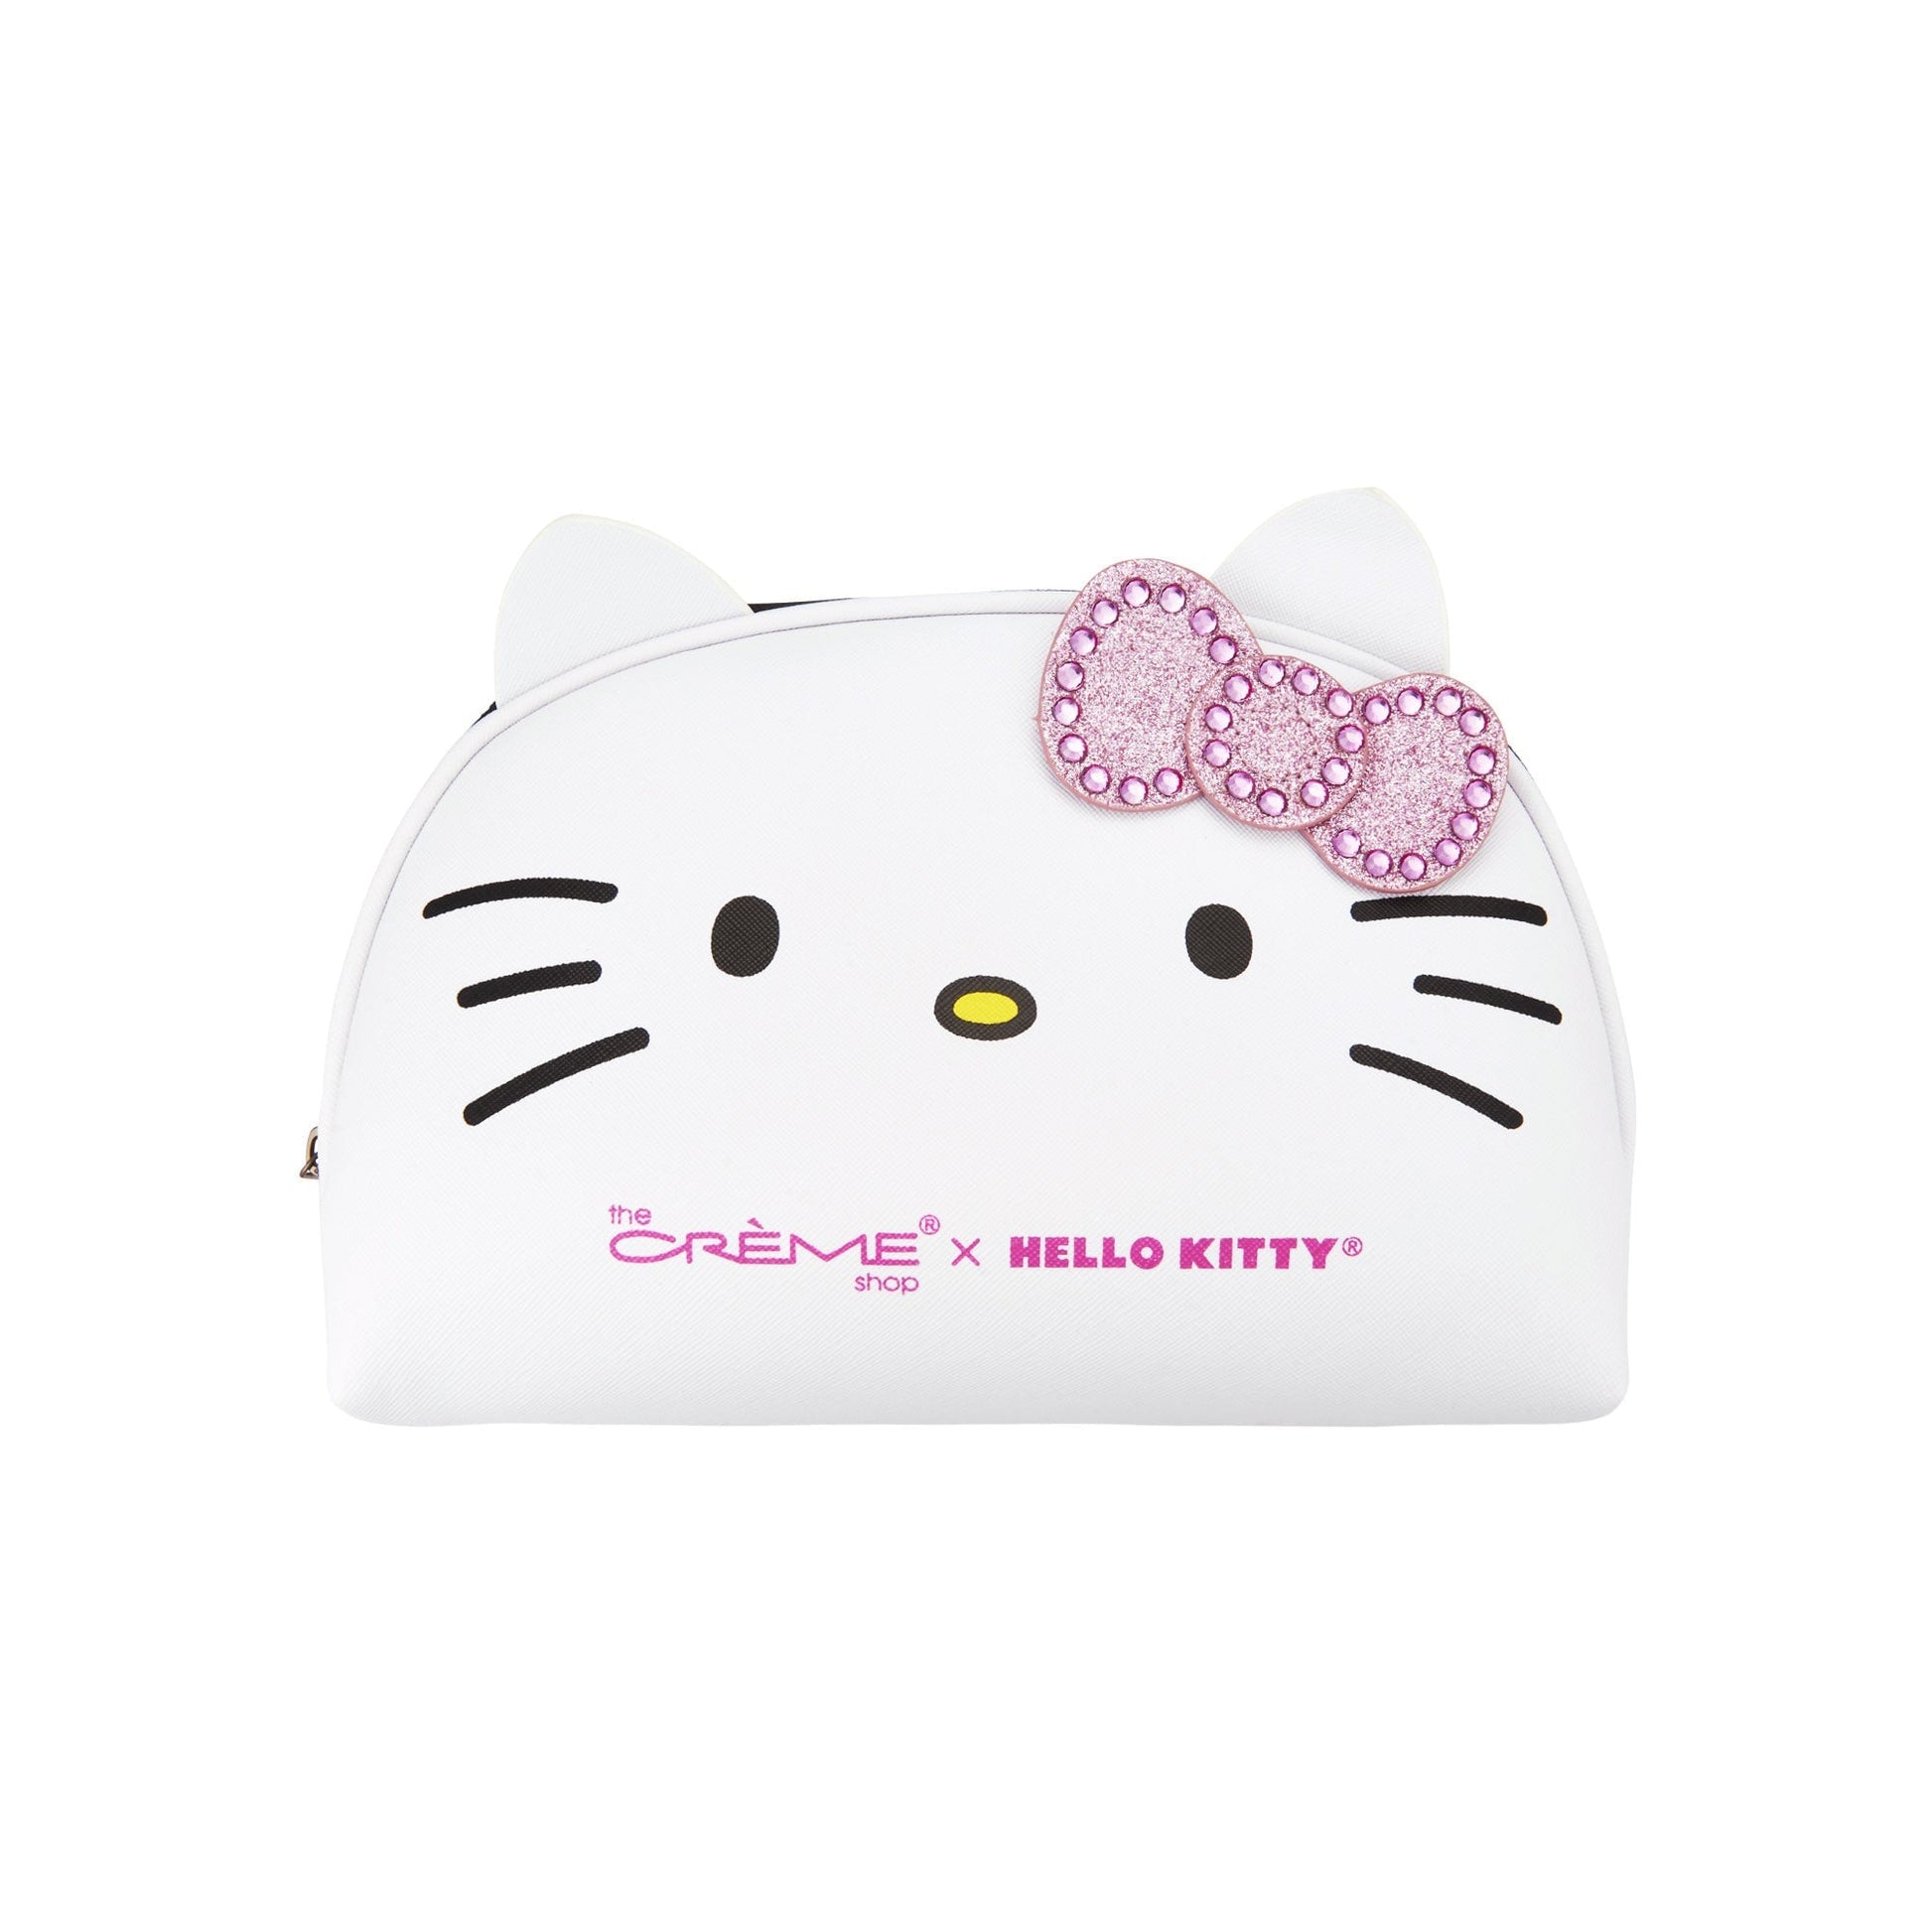 Hello Kitty x Kolin 1.5-Cup Rice Cooker and Food Steamer 0.8L